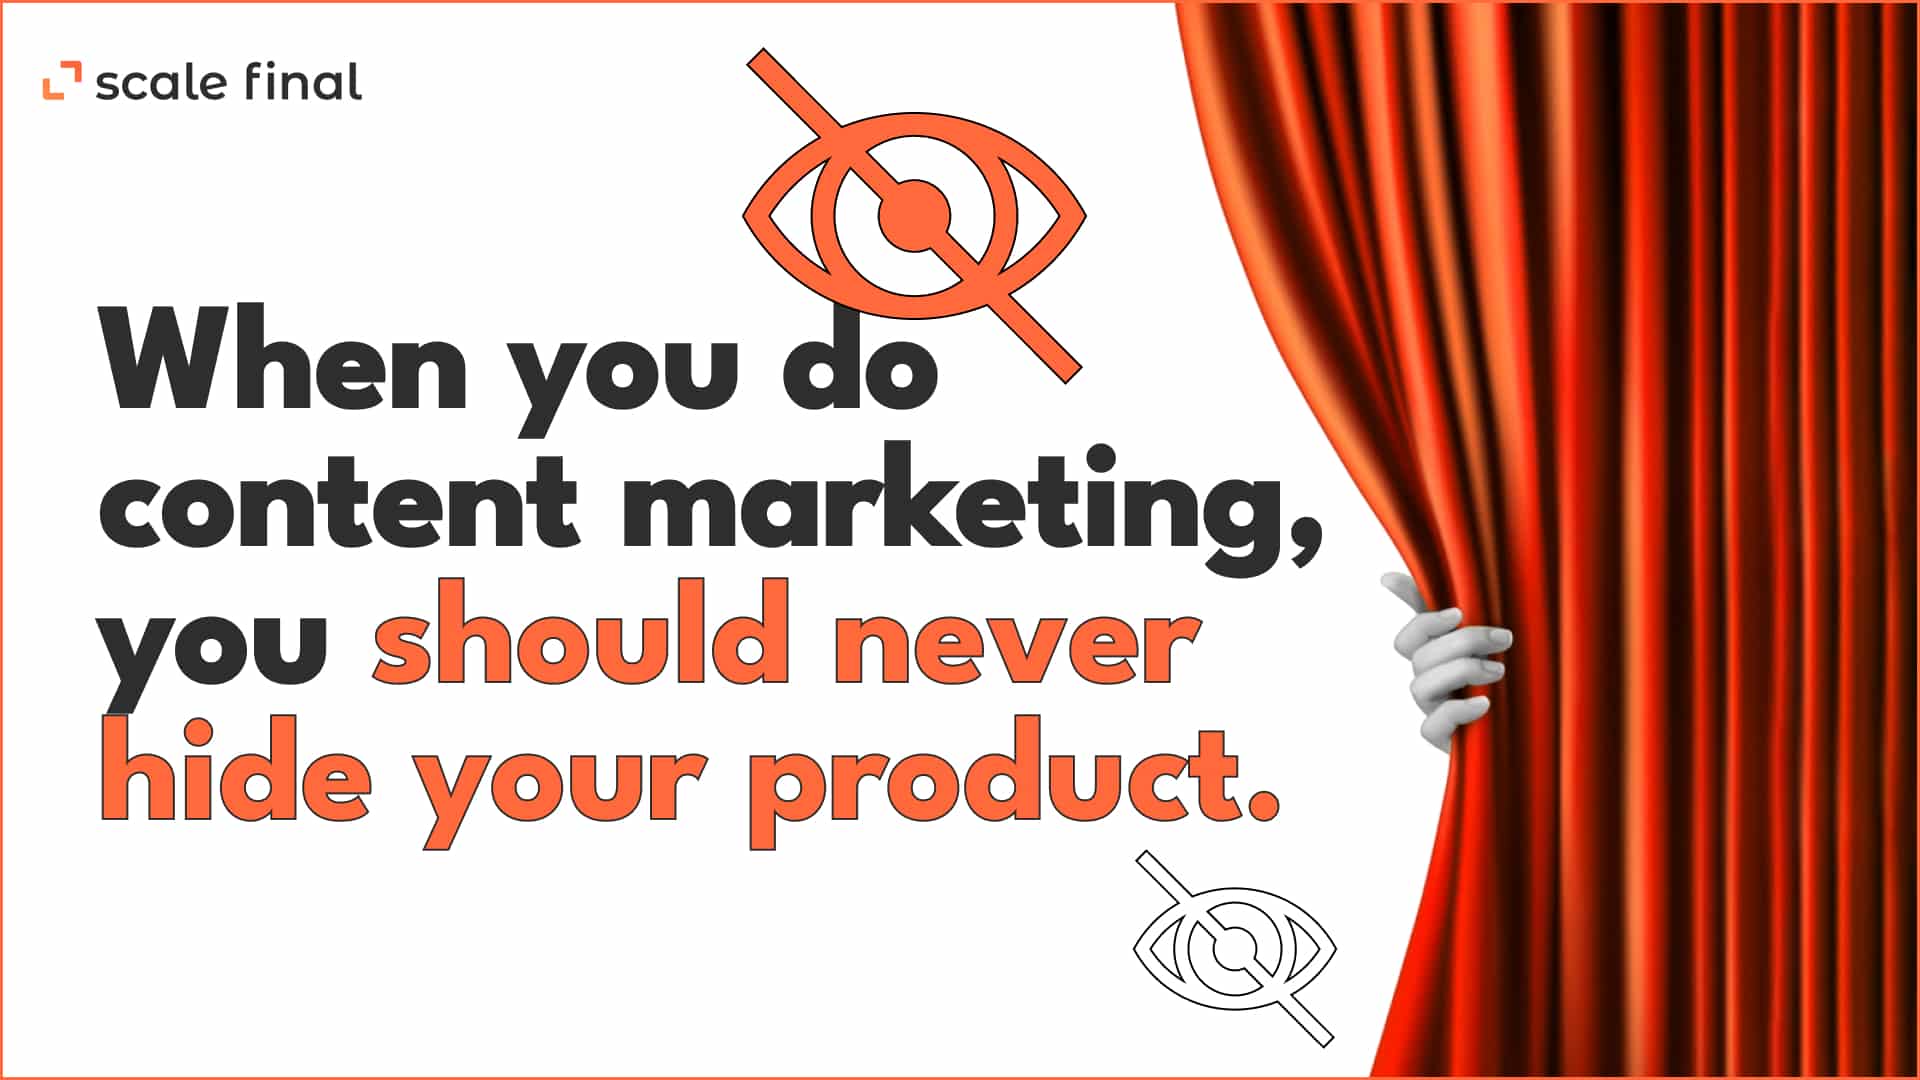 When you do content marketing, you should never hide your product.